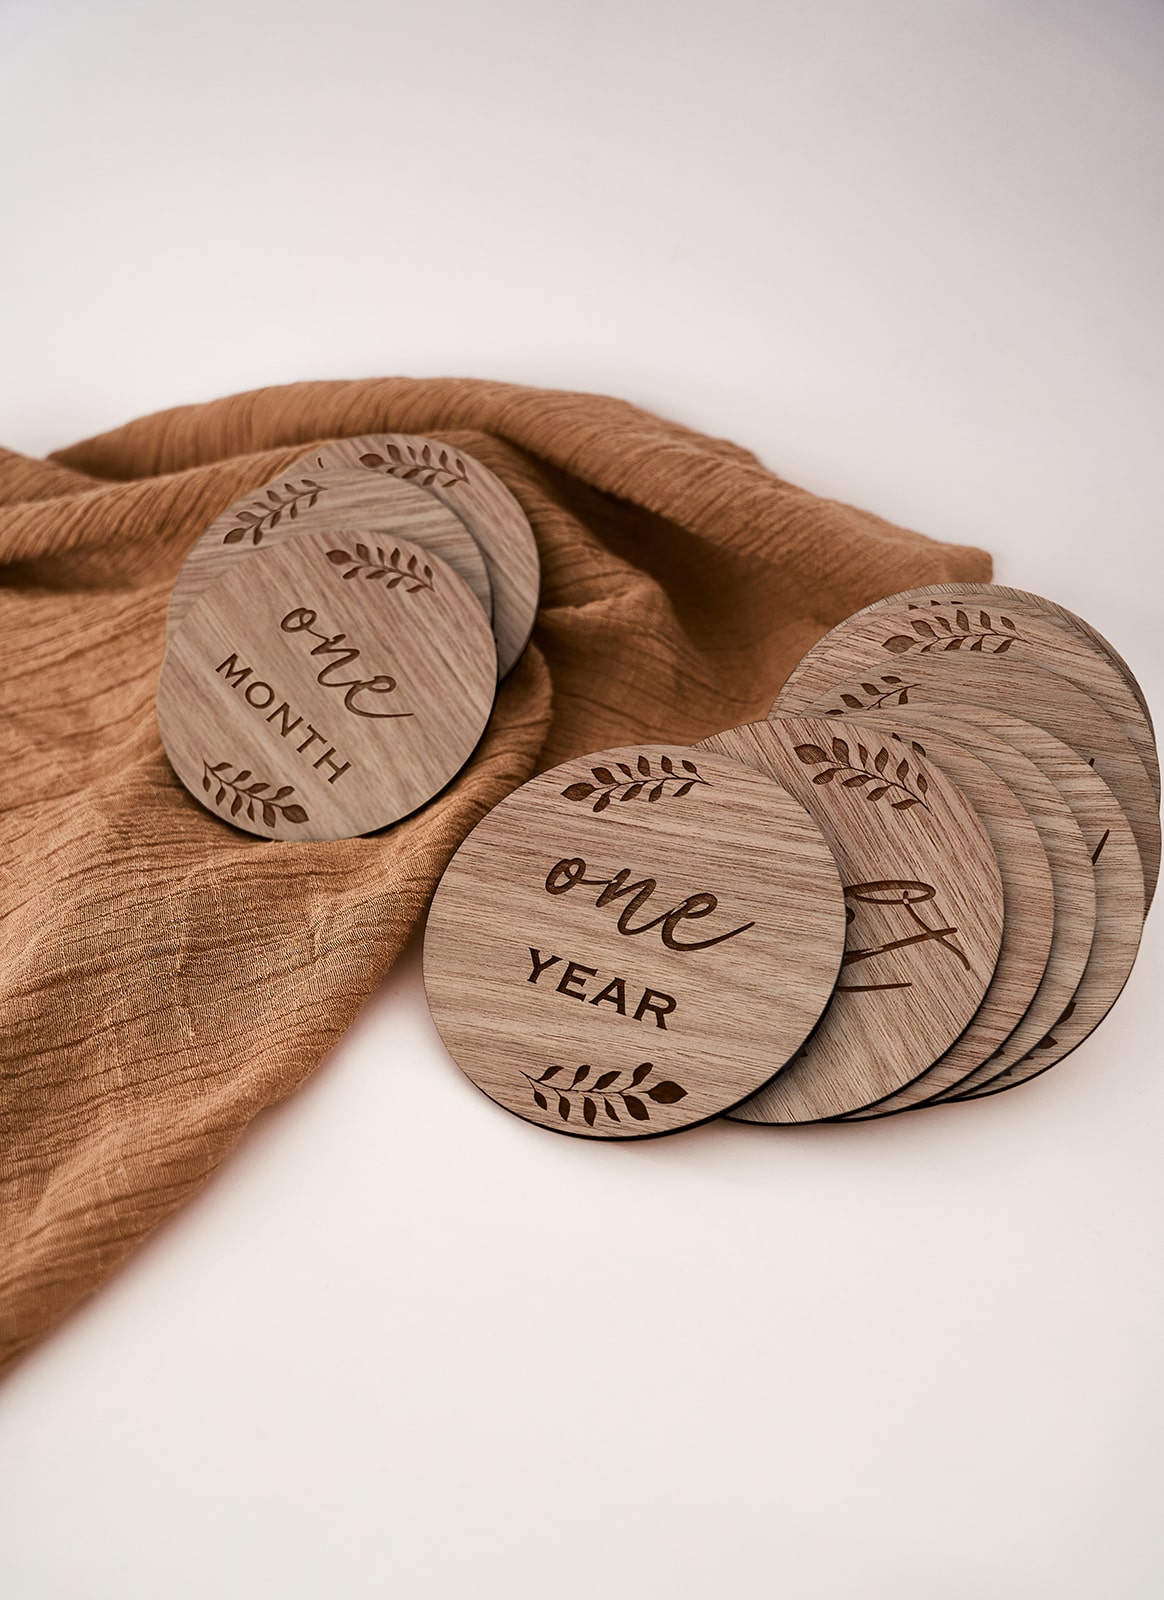 Another image of a laser cutting and engraving project with a brown cloth using Auckland plywood supplier Plyco's 3mm American Walnut Legnoply Pack on a white background